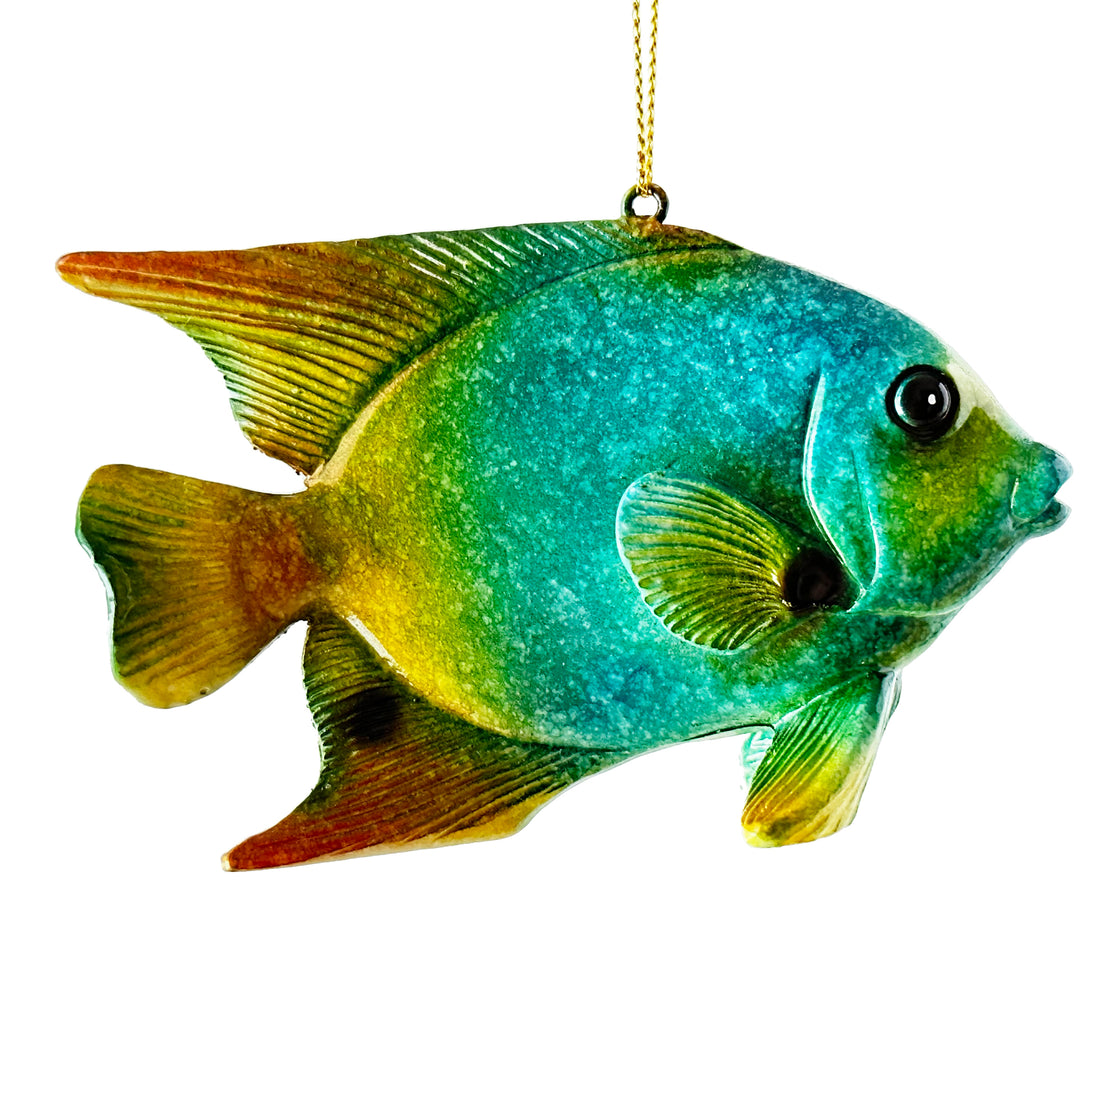 Tropical Fish Christmas Ornament - A Splash of Hawaii and Ocean Delight for Your Tree!